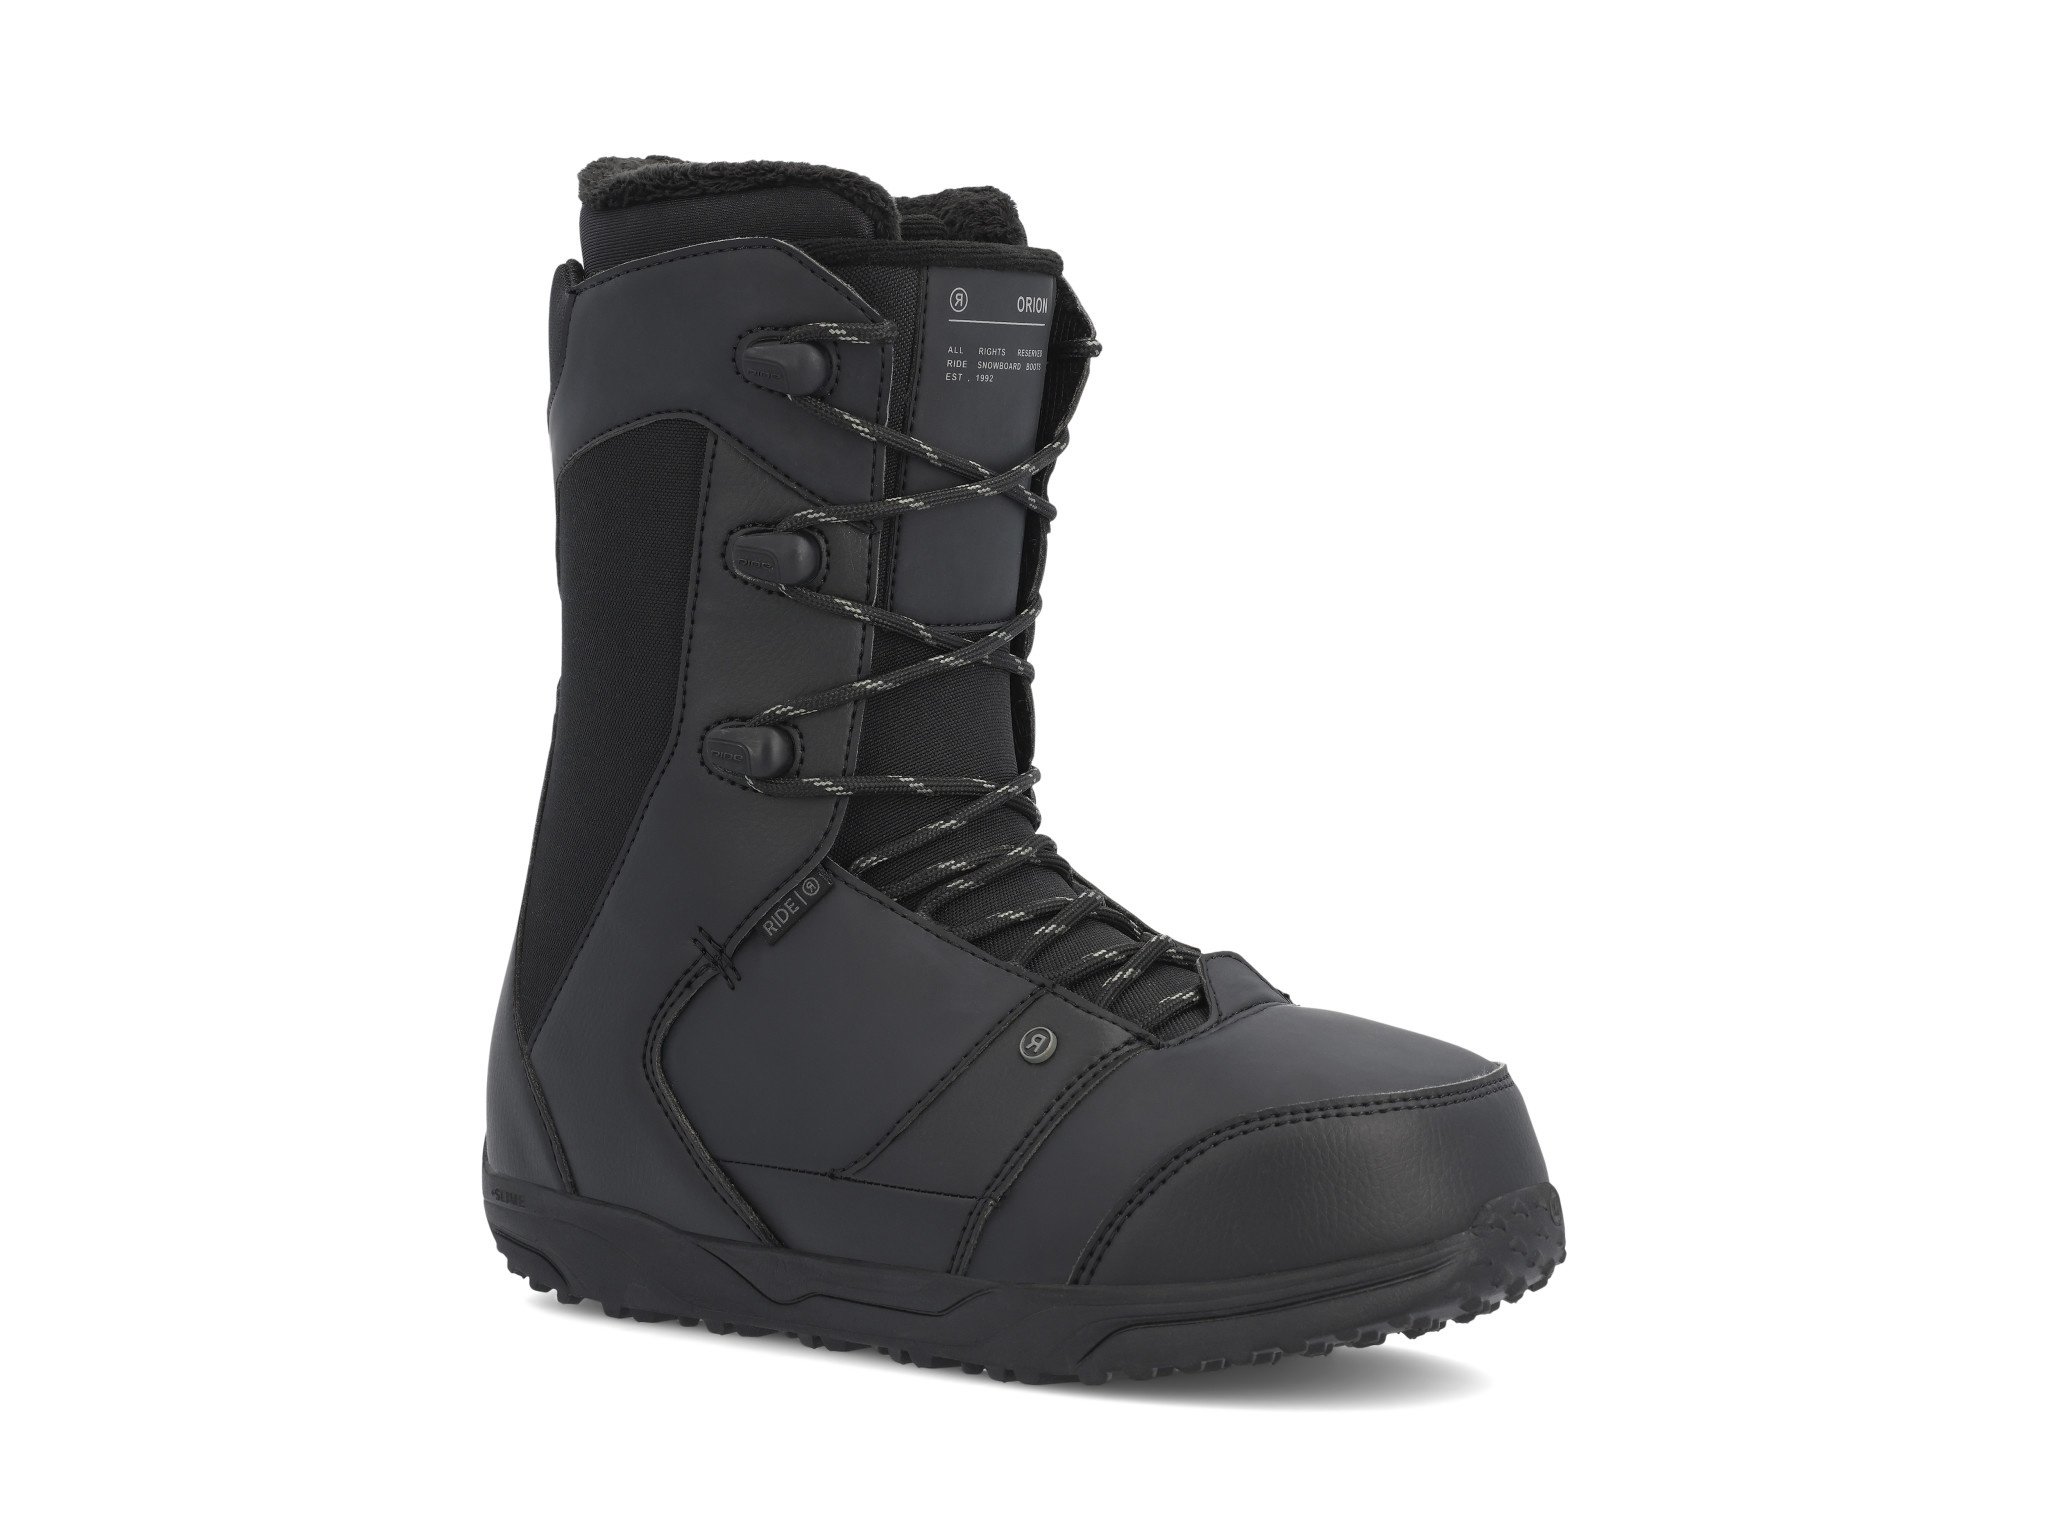 Ride Ride M's Orion Snowboard Boot (22/23)